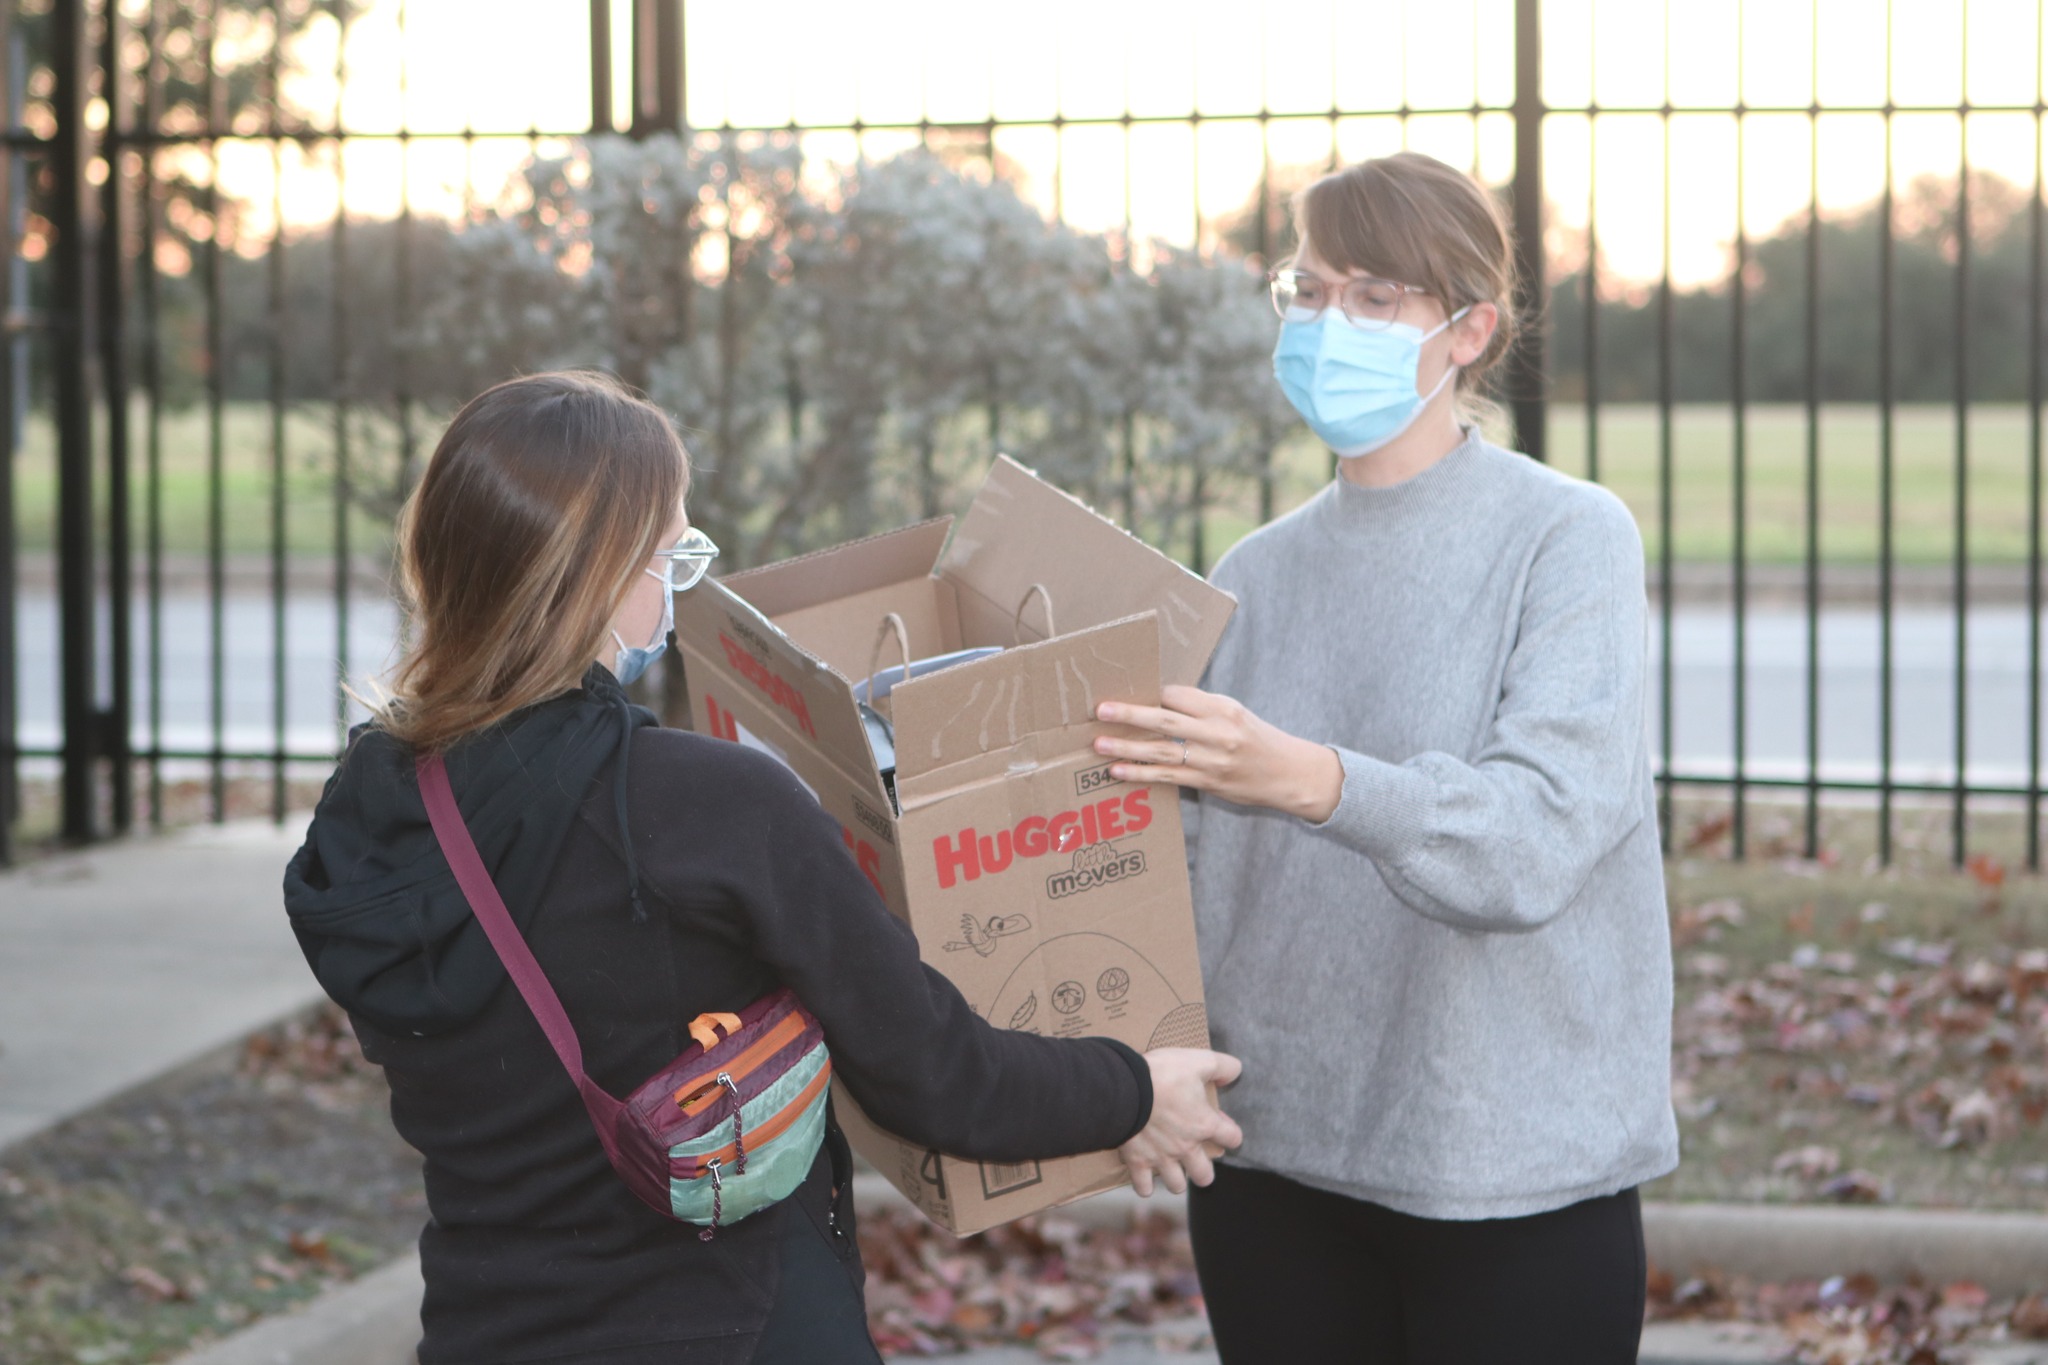 Image description: A photo of a person in a grey sweater accepting a box of gifts from another person who is wearing a black jacket and cute purse. They are both wearing masks and standing in the SAFE Family Shelter parking log.